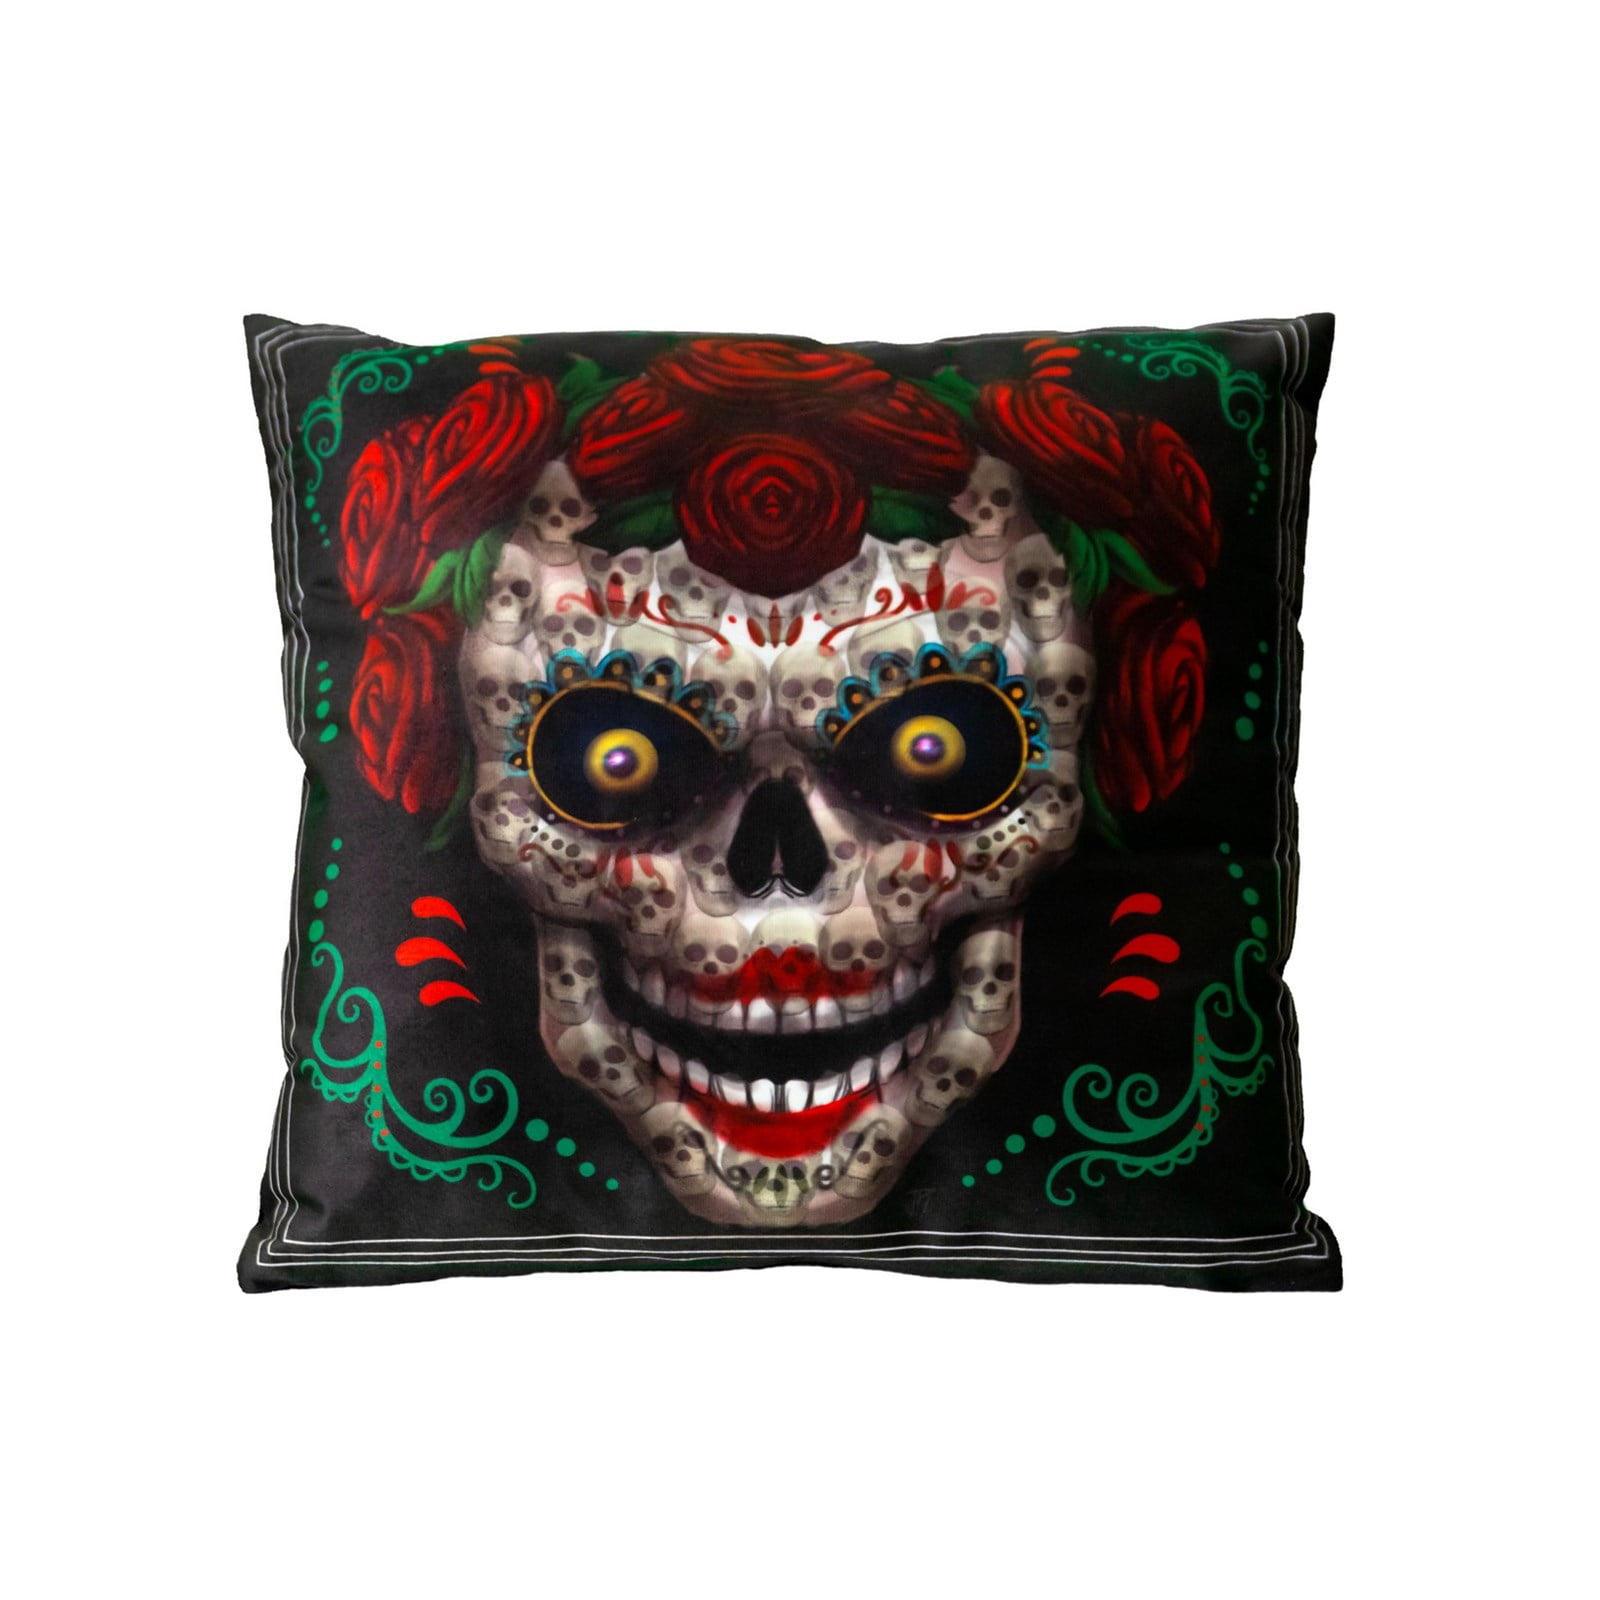 "Day of the Dead"  Halloween HEART Pillow 11 x 13 